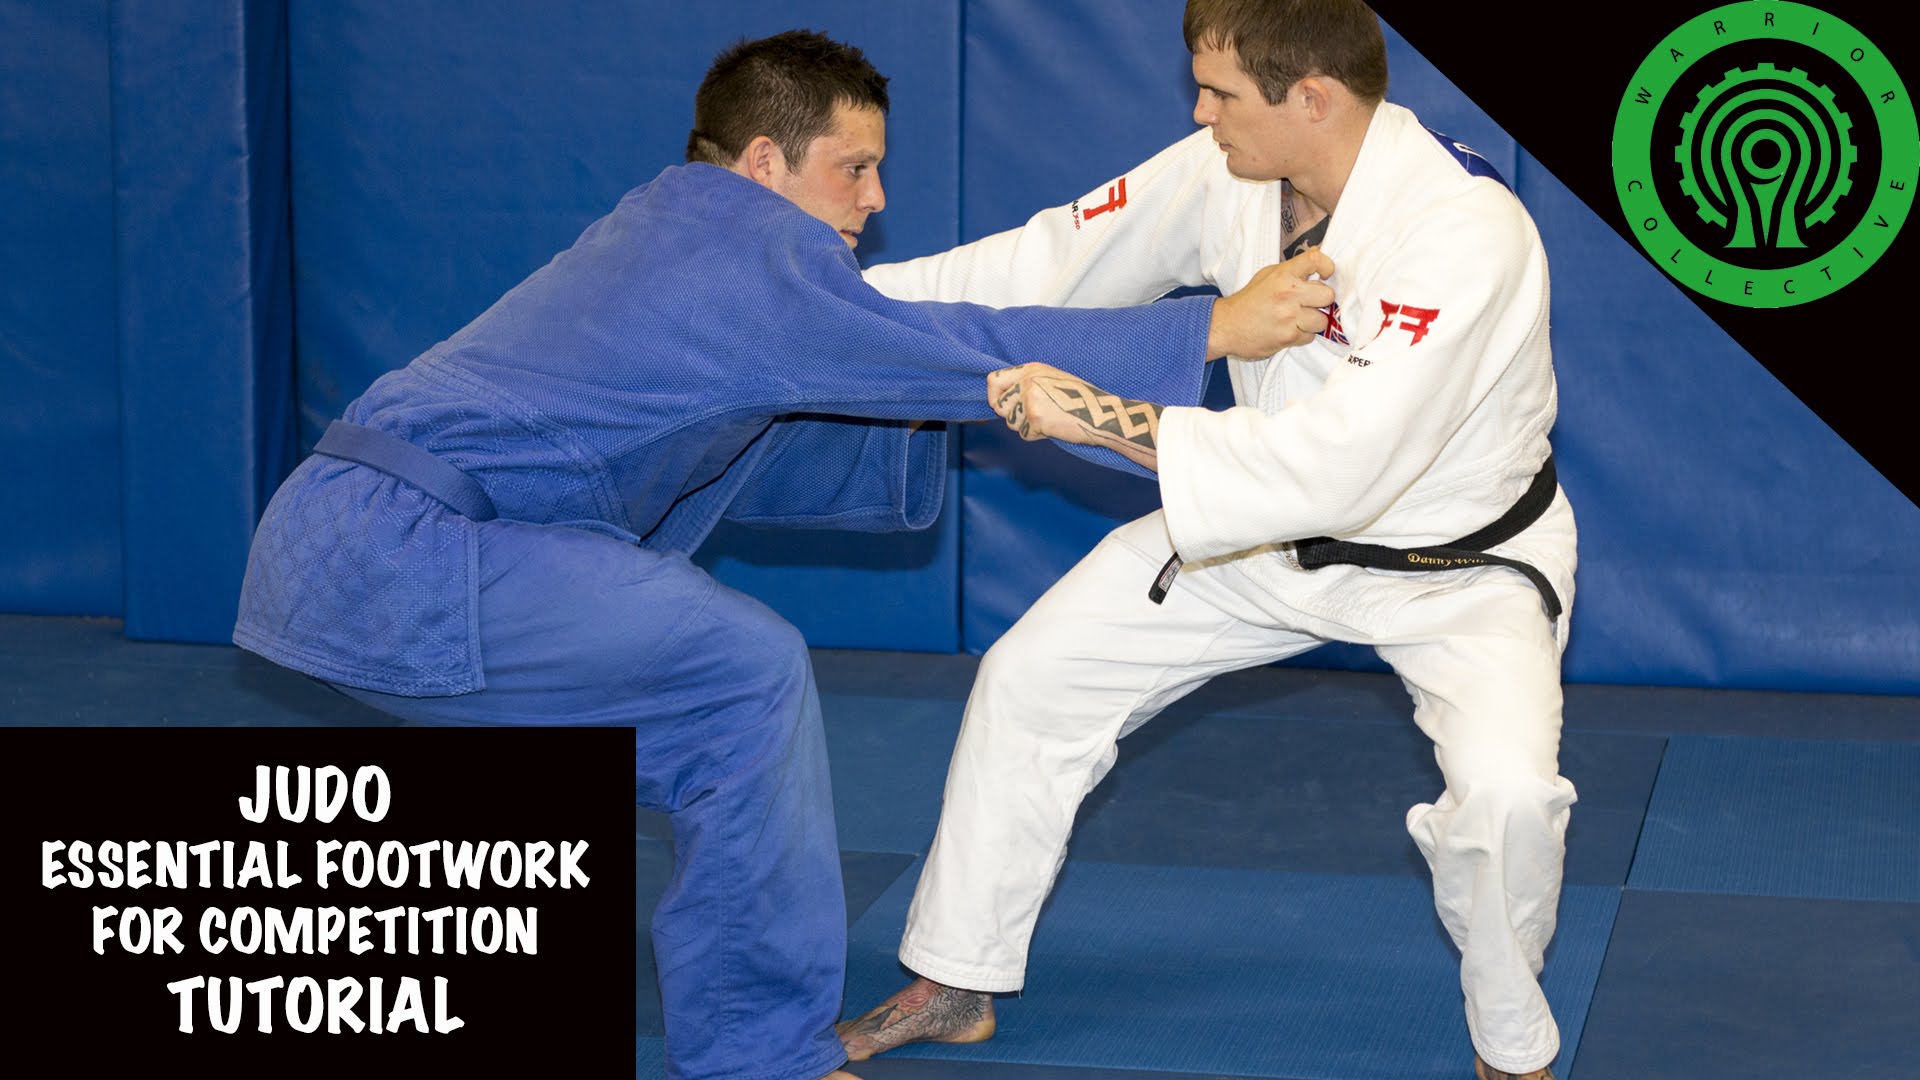 Judo Essential Footwork for Competition Tutorial